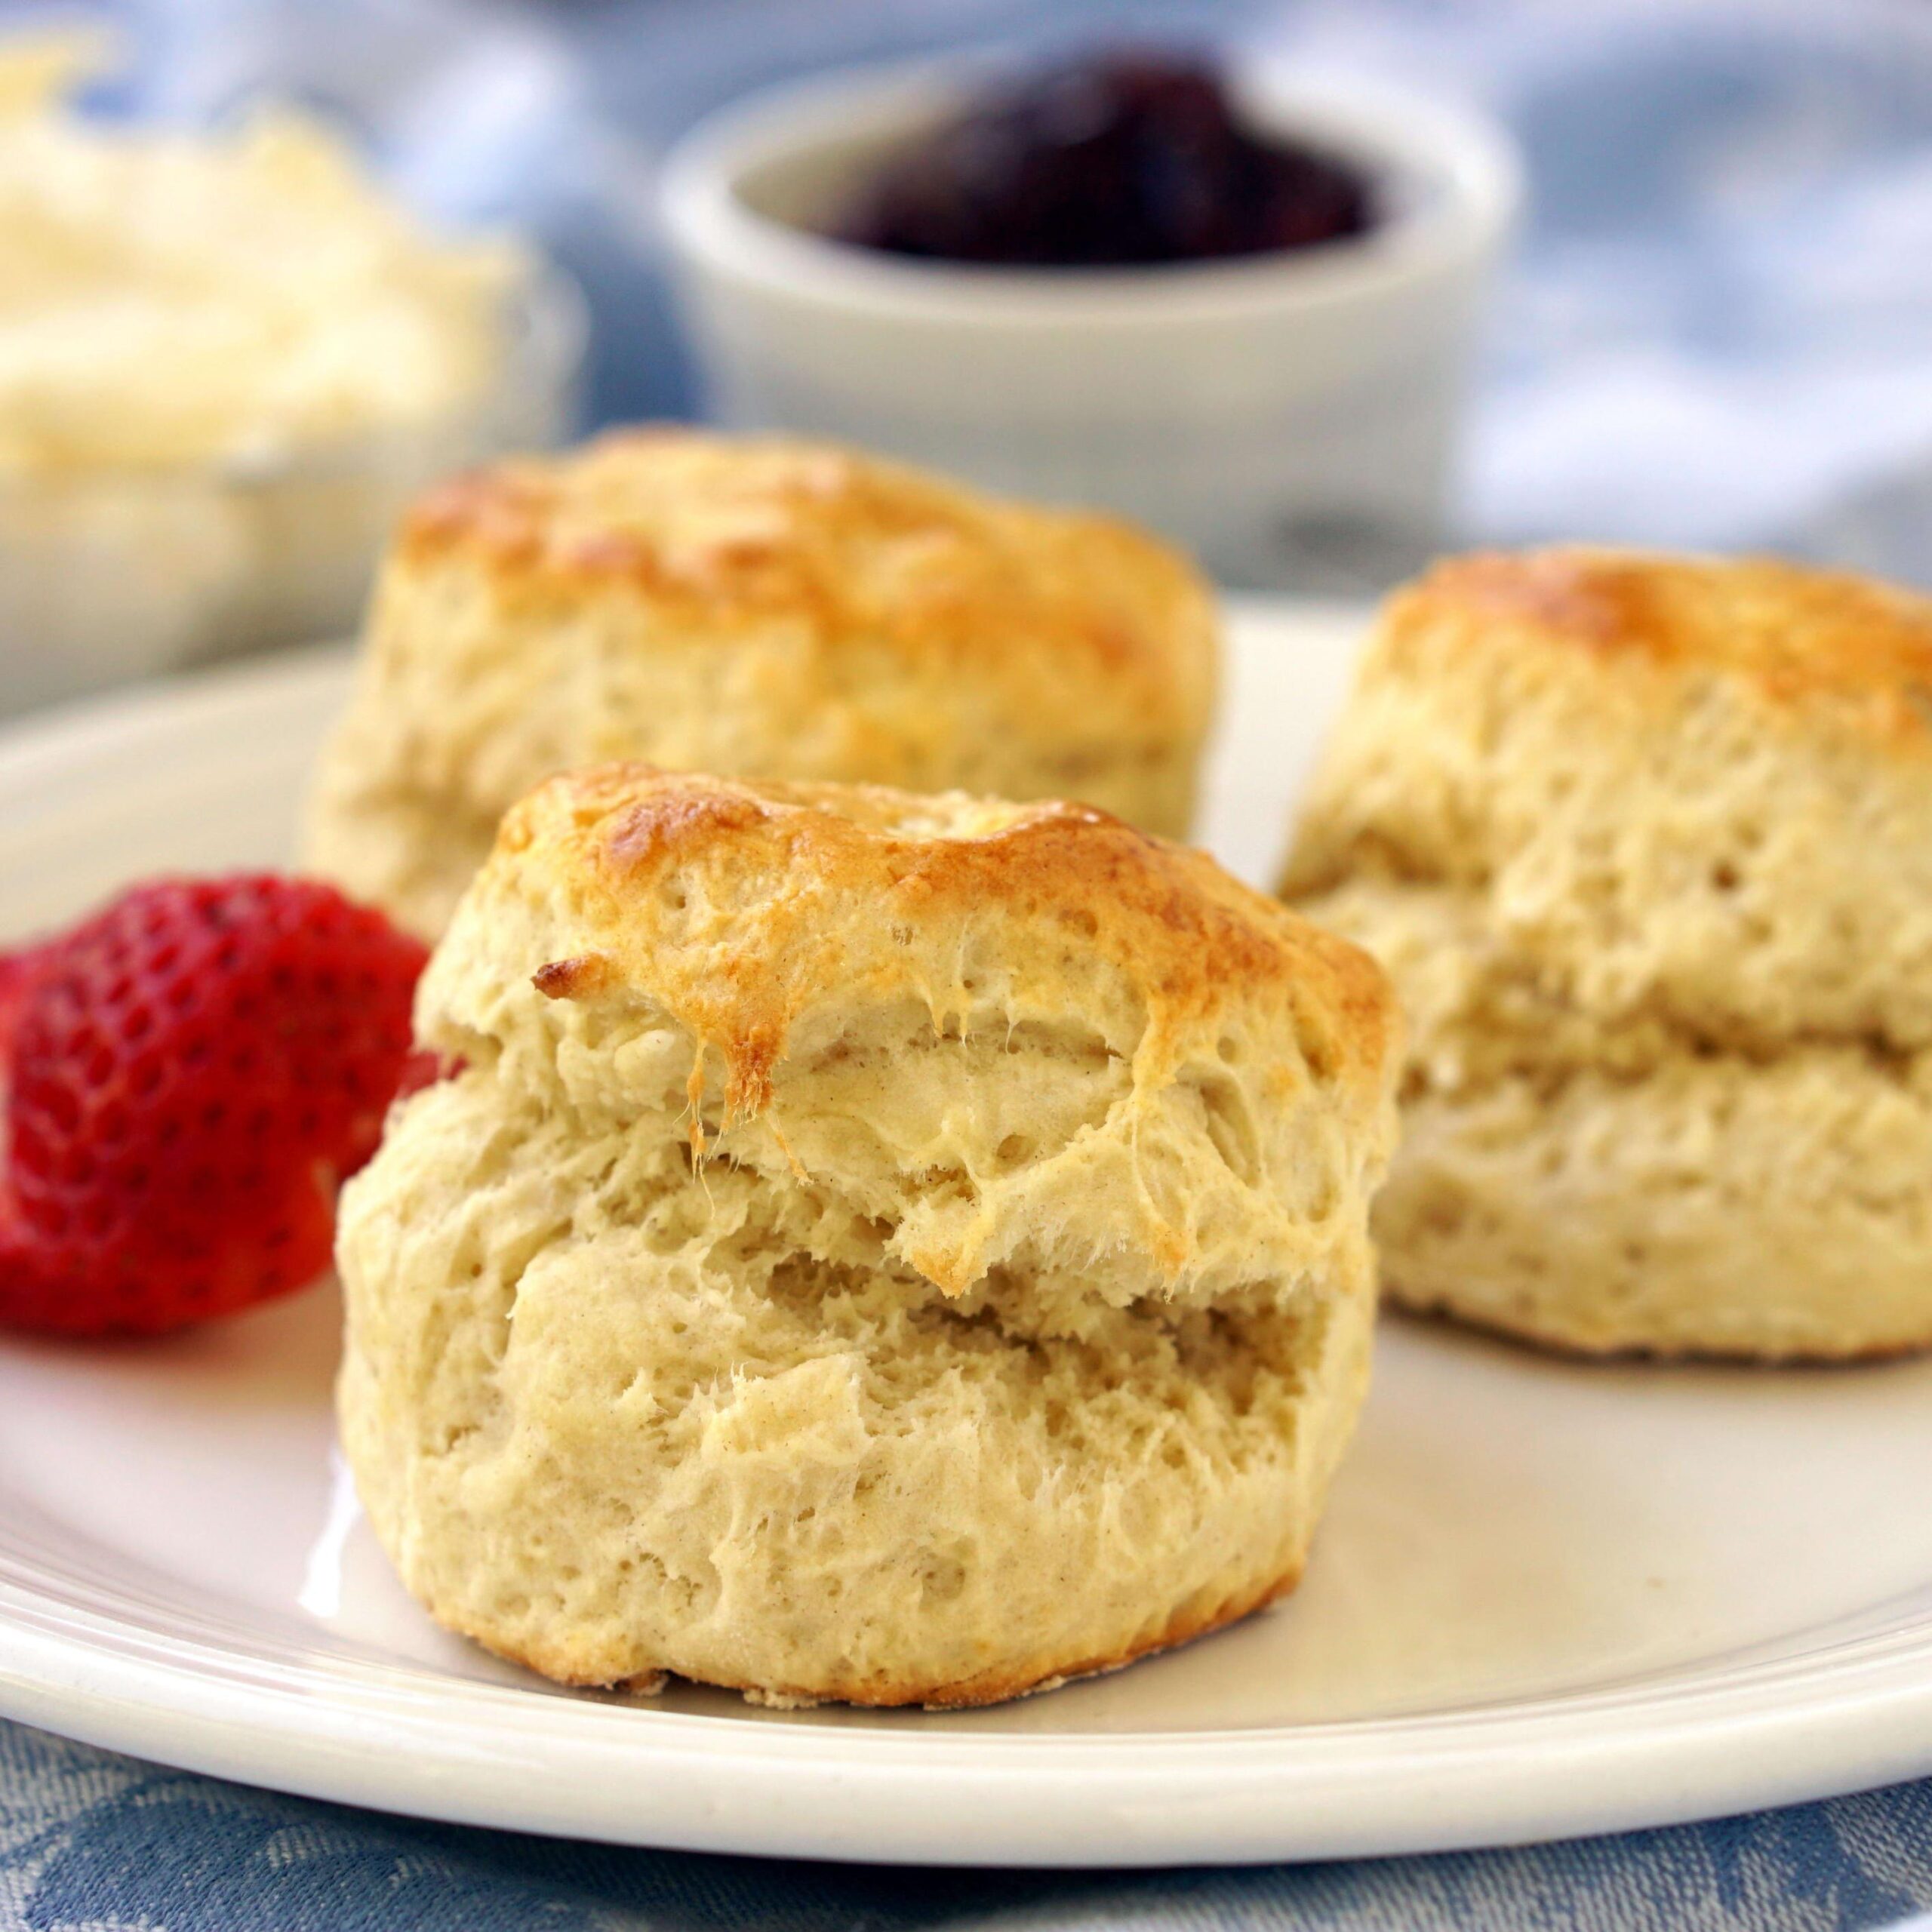  Satisfy your sweet tooth cravings with these buttery scones.